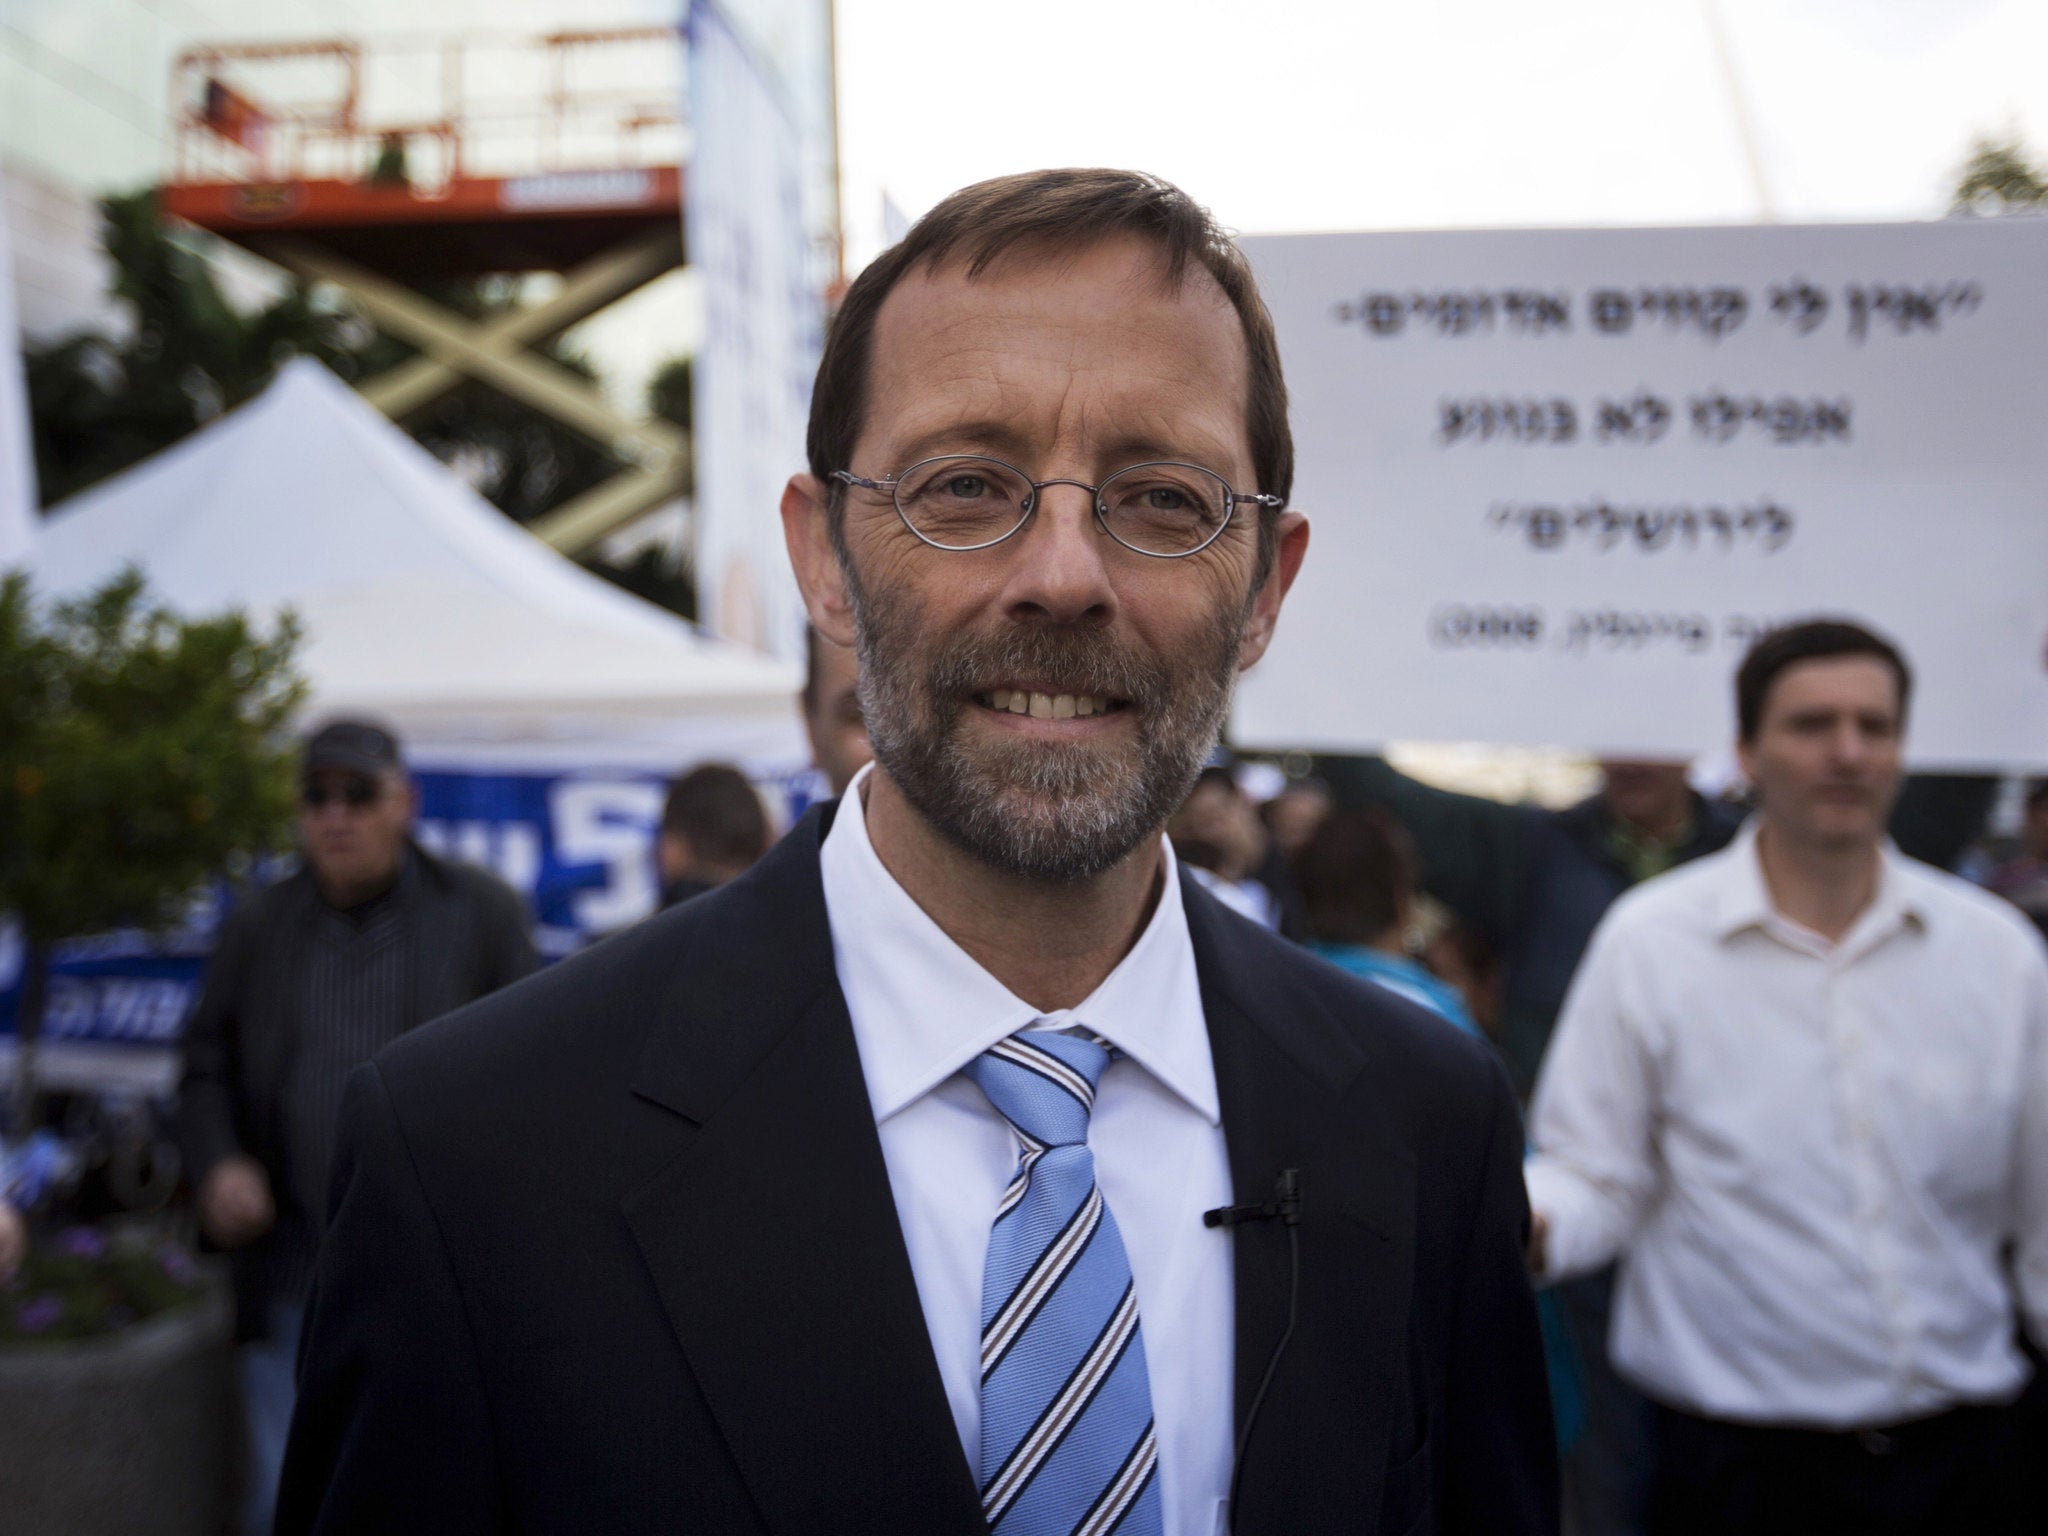 Moshe Feiglin leaves a polling station after casting his vote on November 25, 2012 in Jerusalem